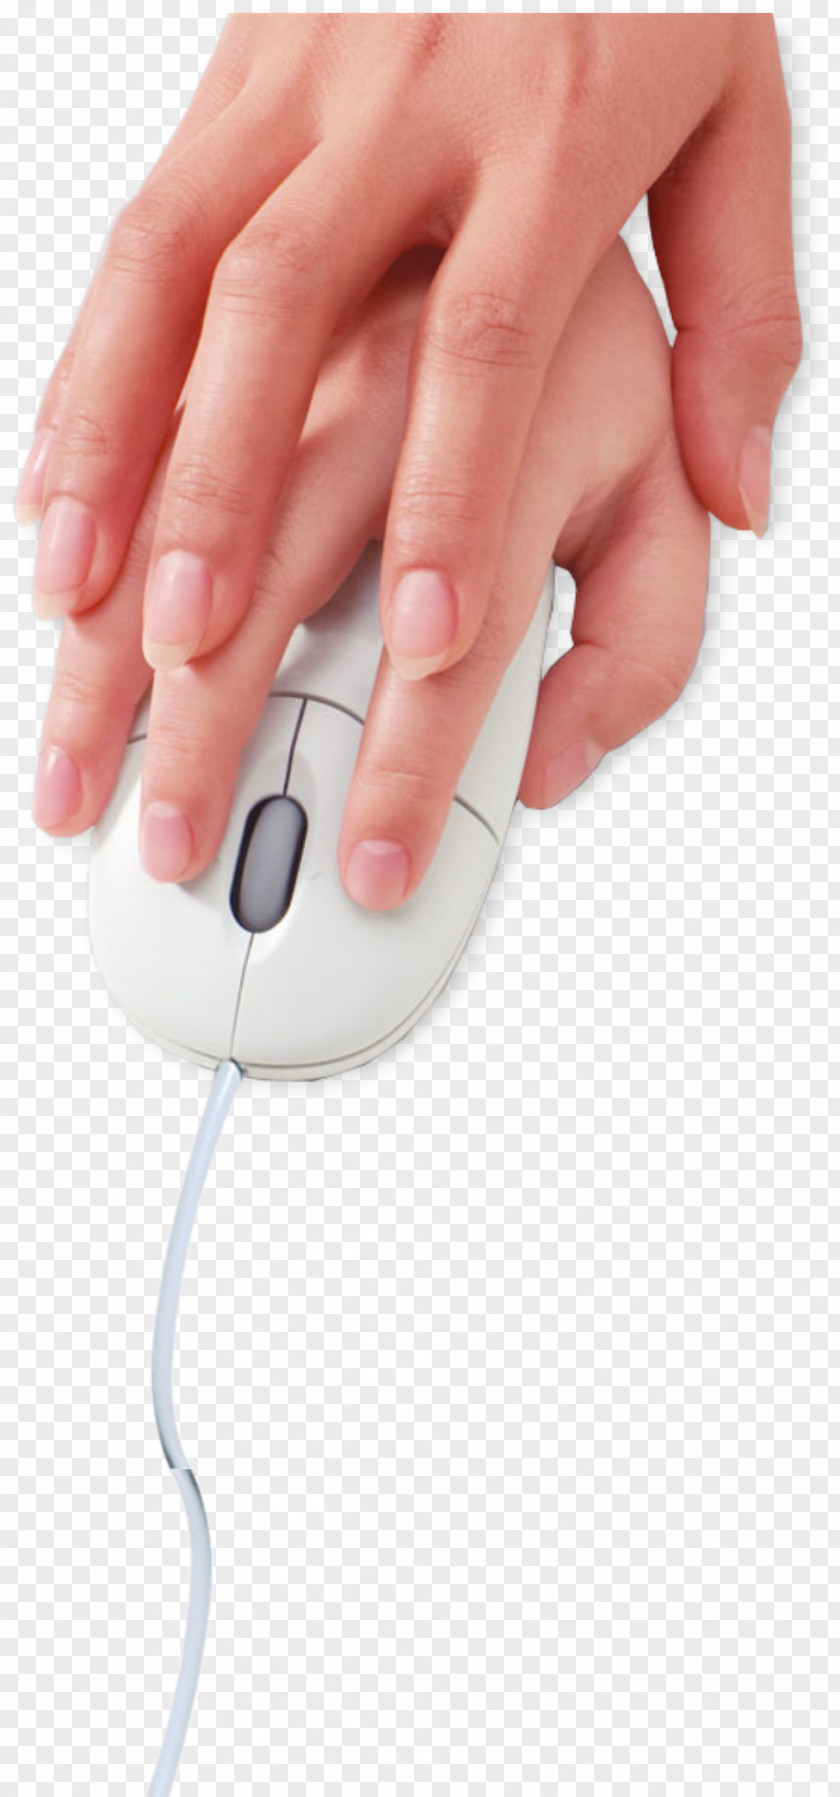 Holding The Mouse Nail Electronics Chinglish PNG